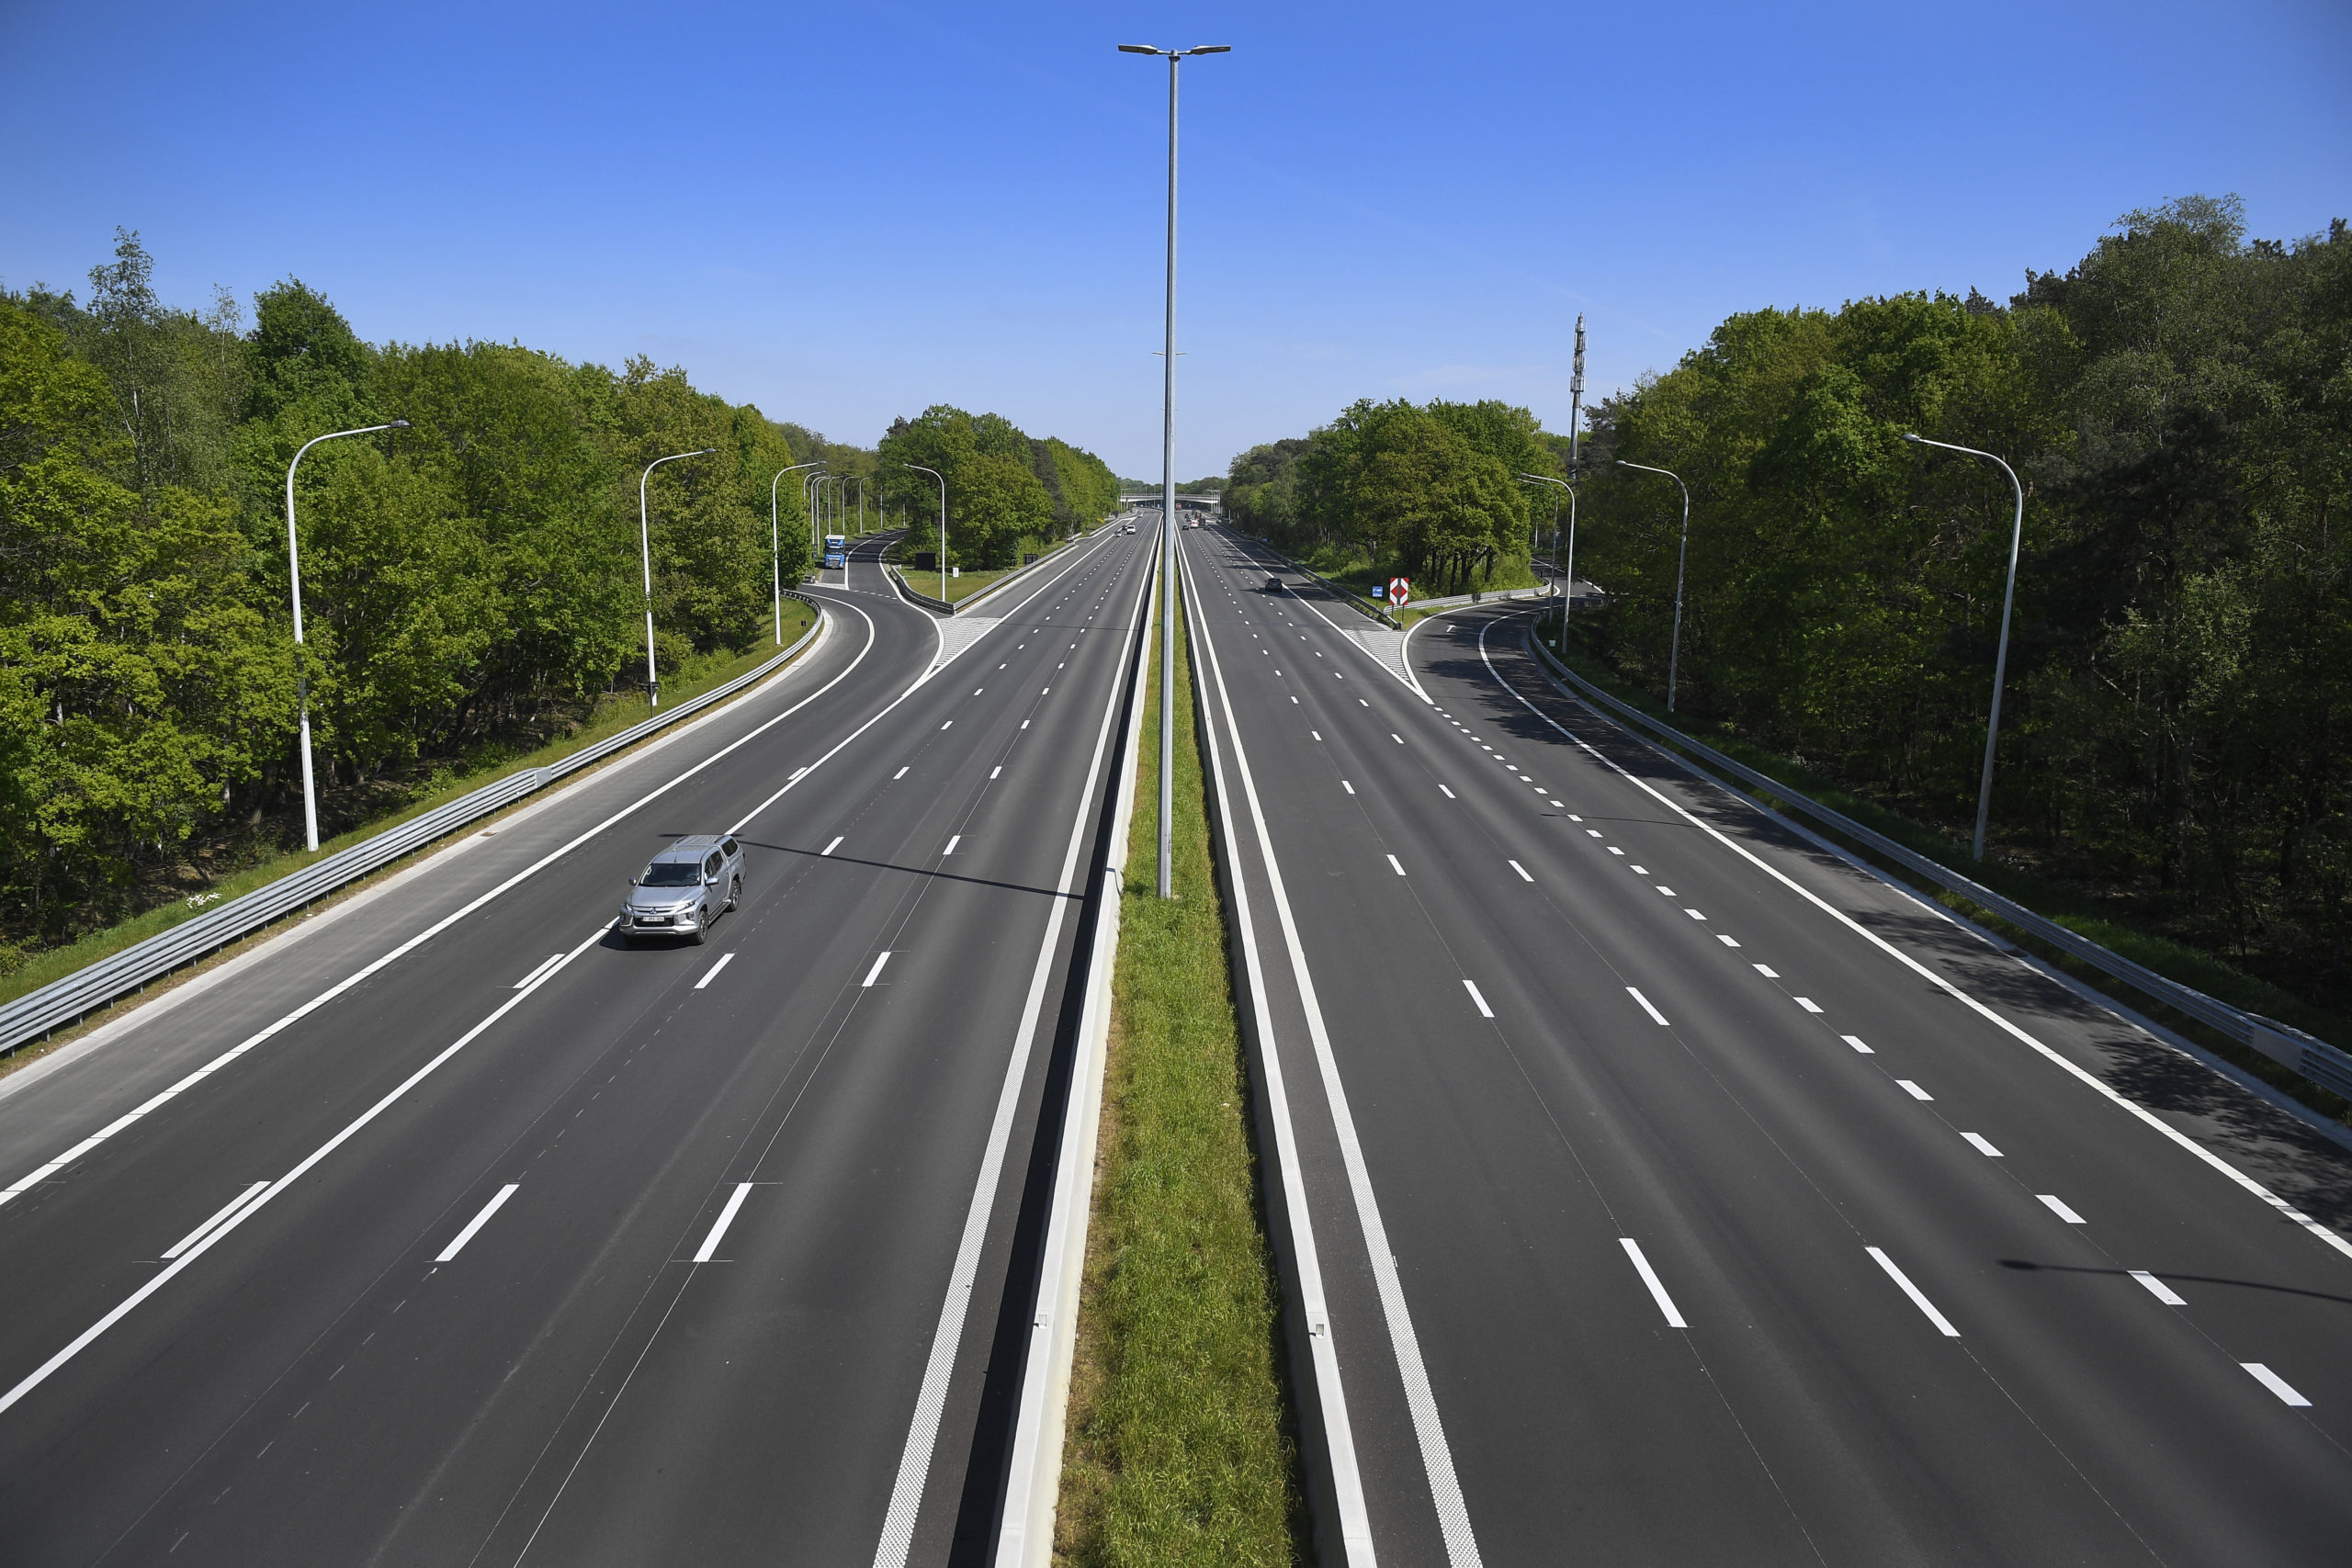 TomTom: ‘Traffic in Belgium decreased by one-fifth in 2020’